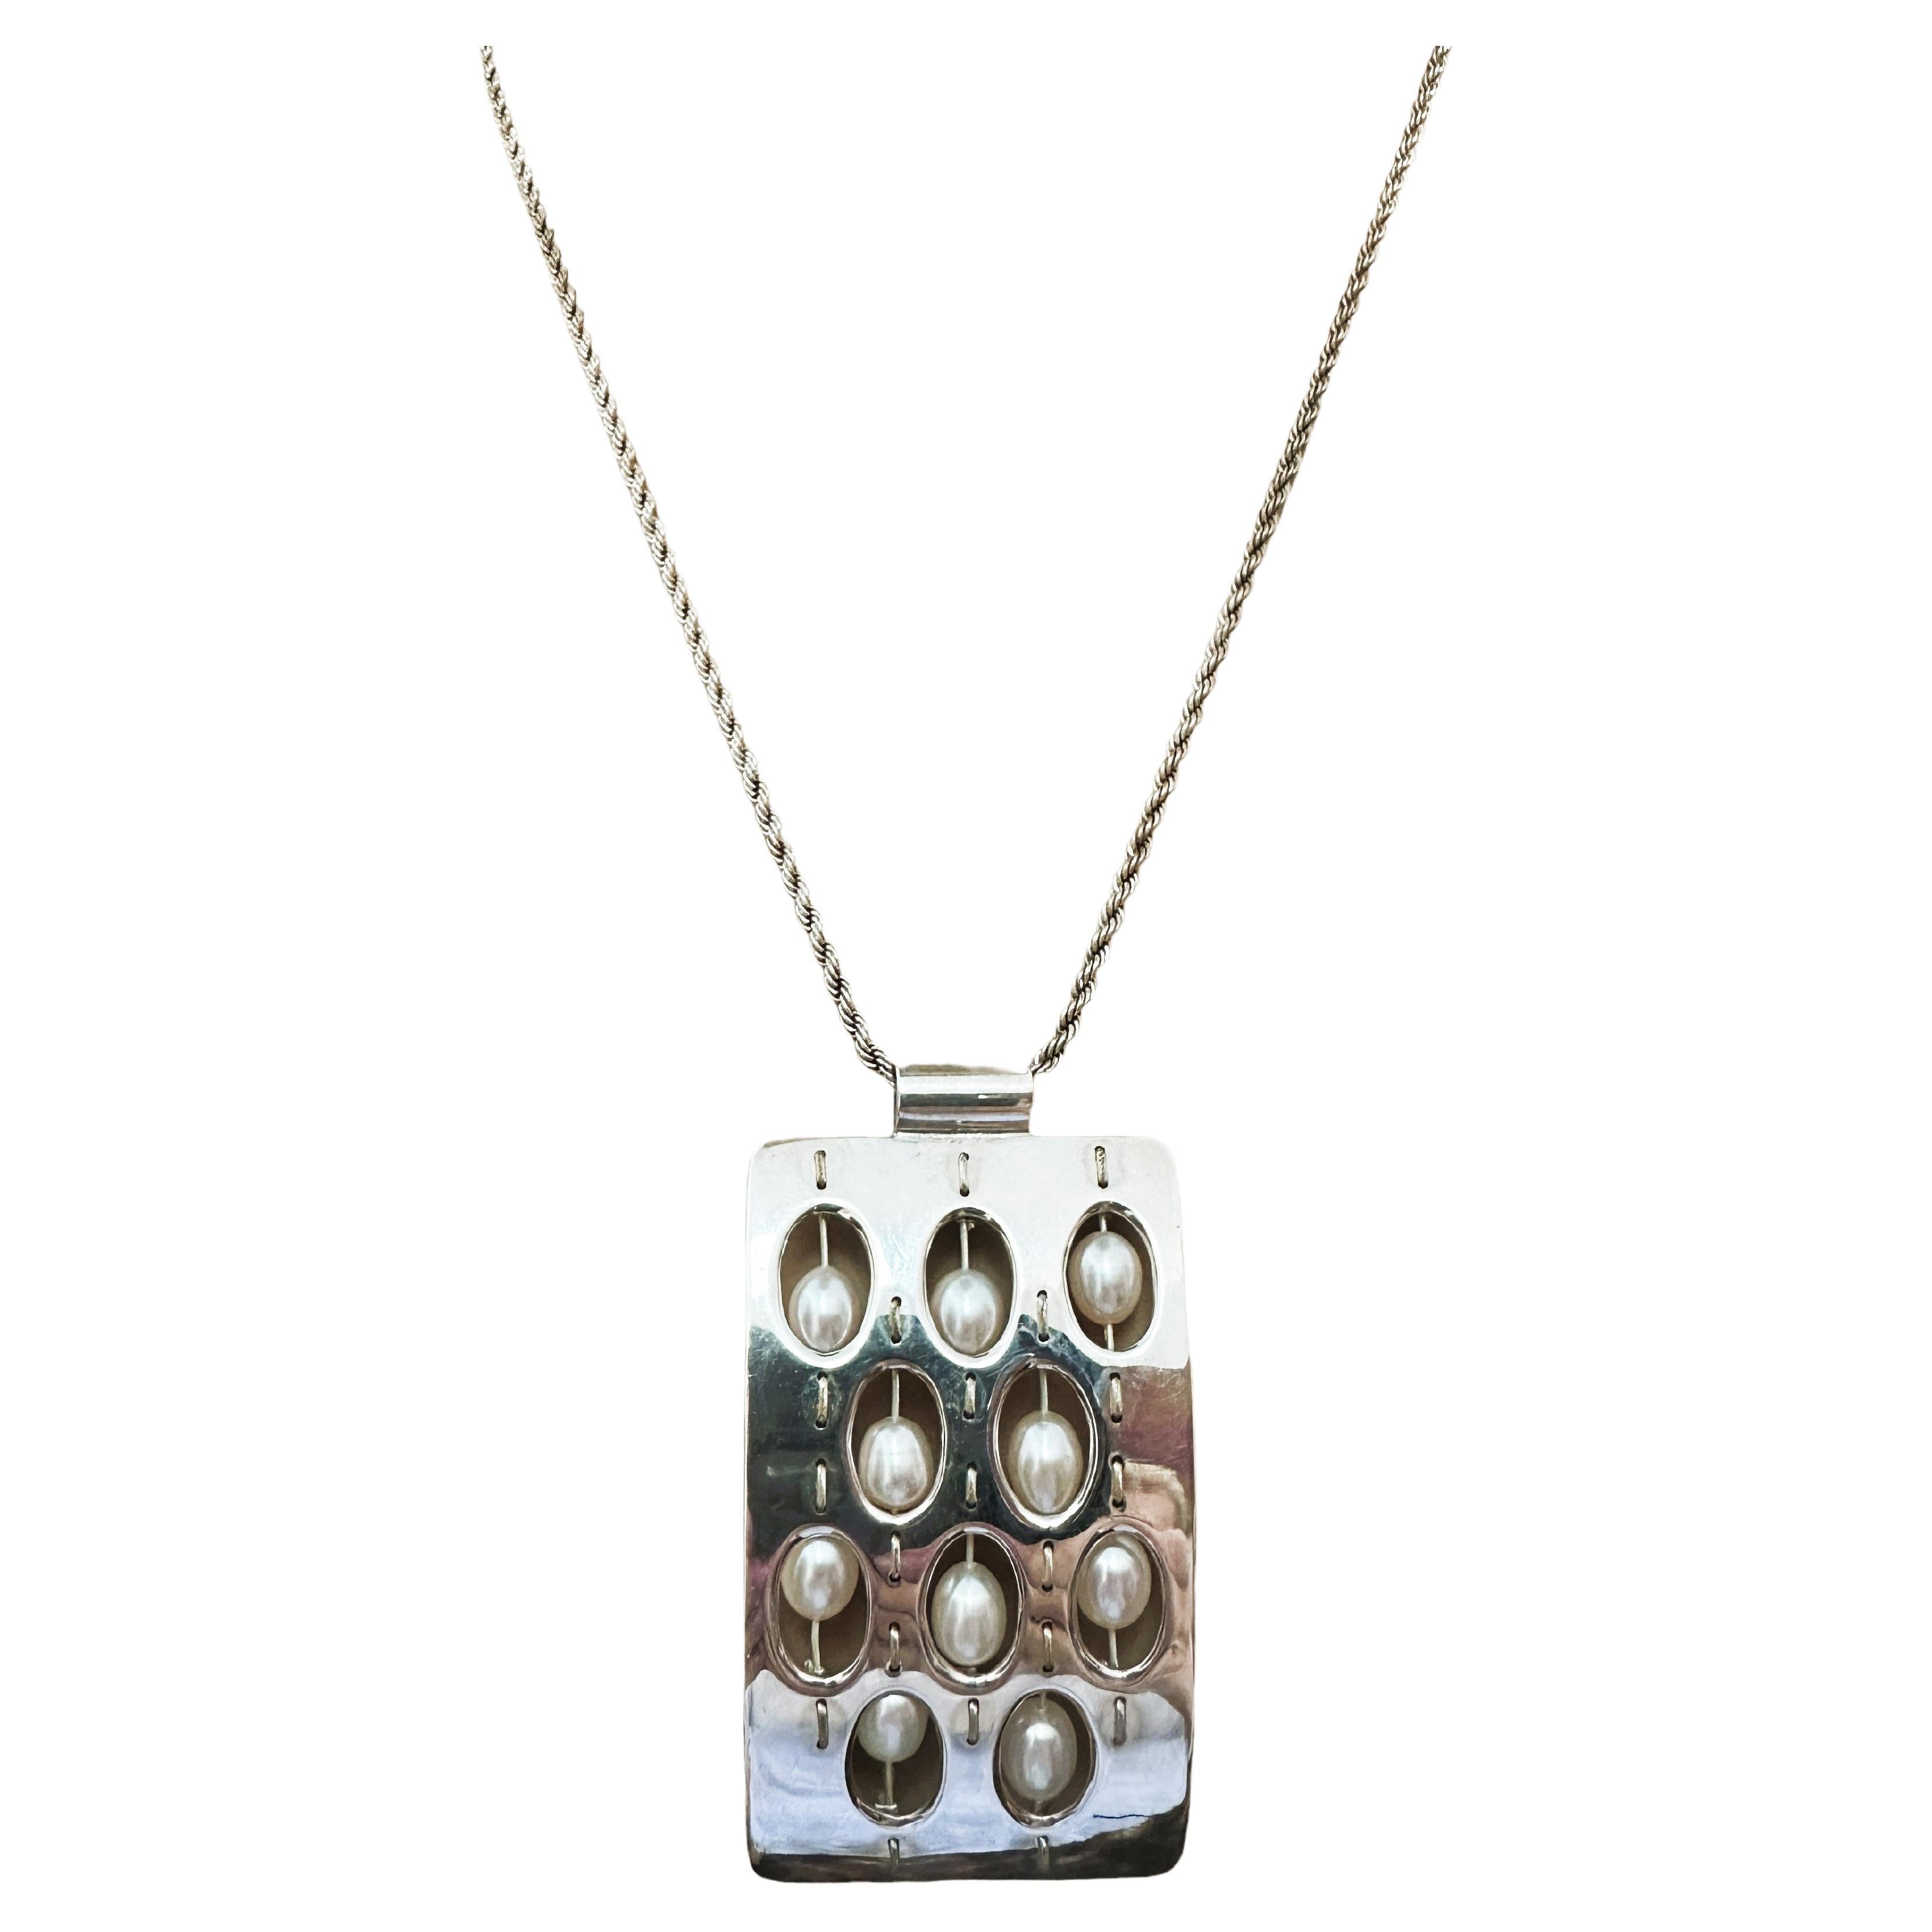 Designer Sterling Silver & Pearl Pendant Necklace by TSJ&M 20" For Sale